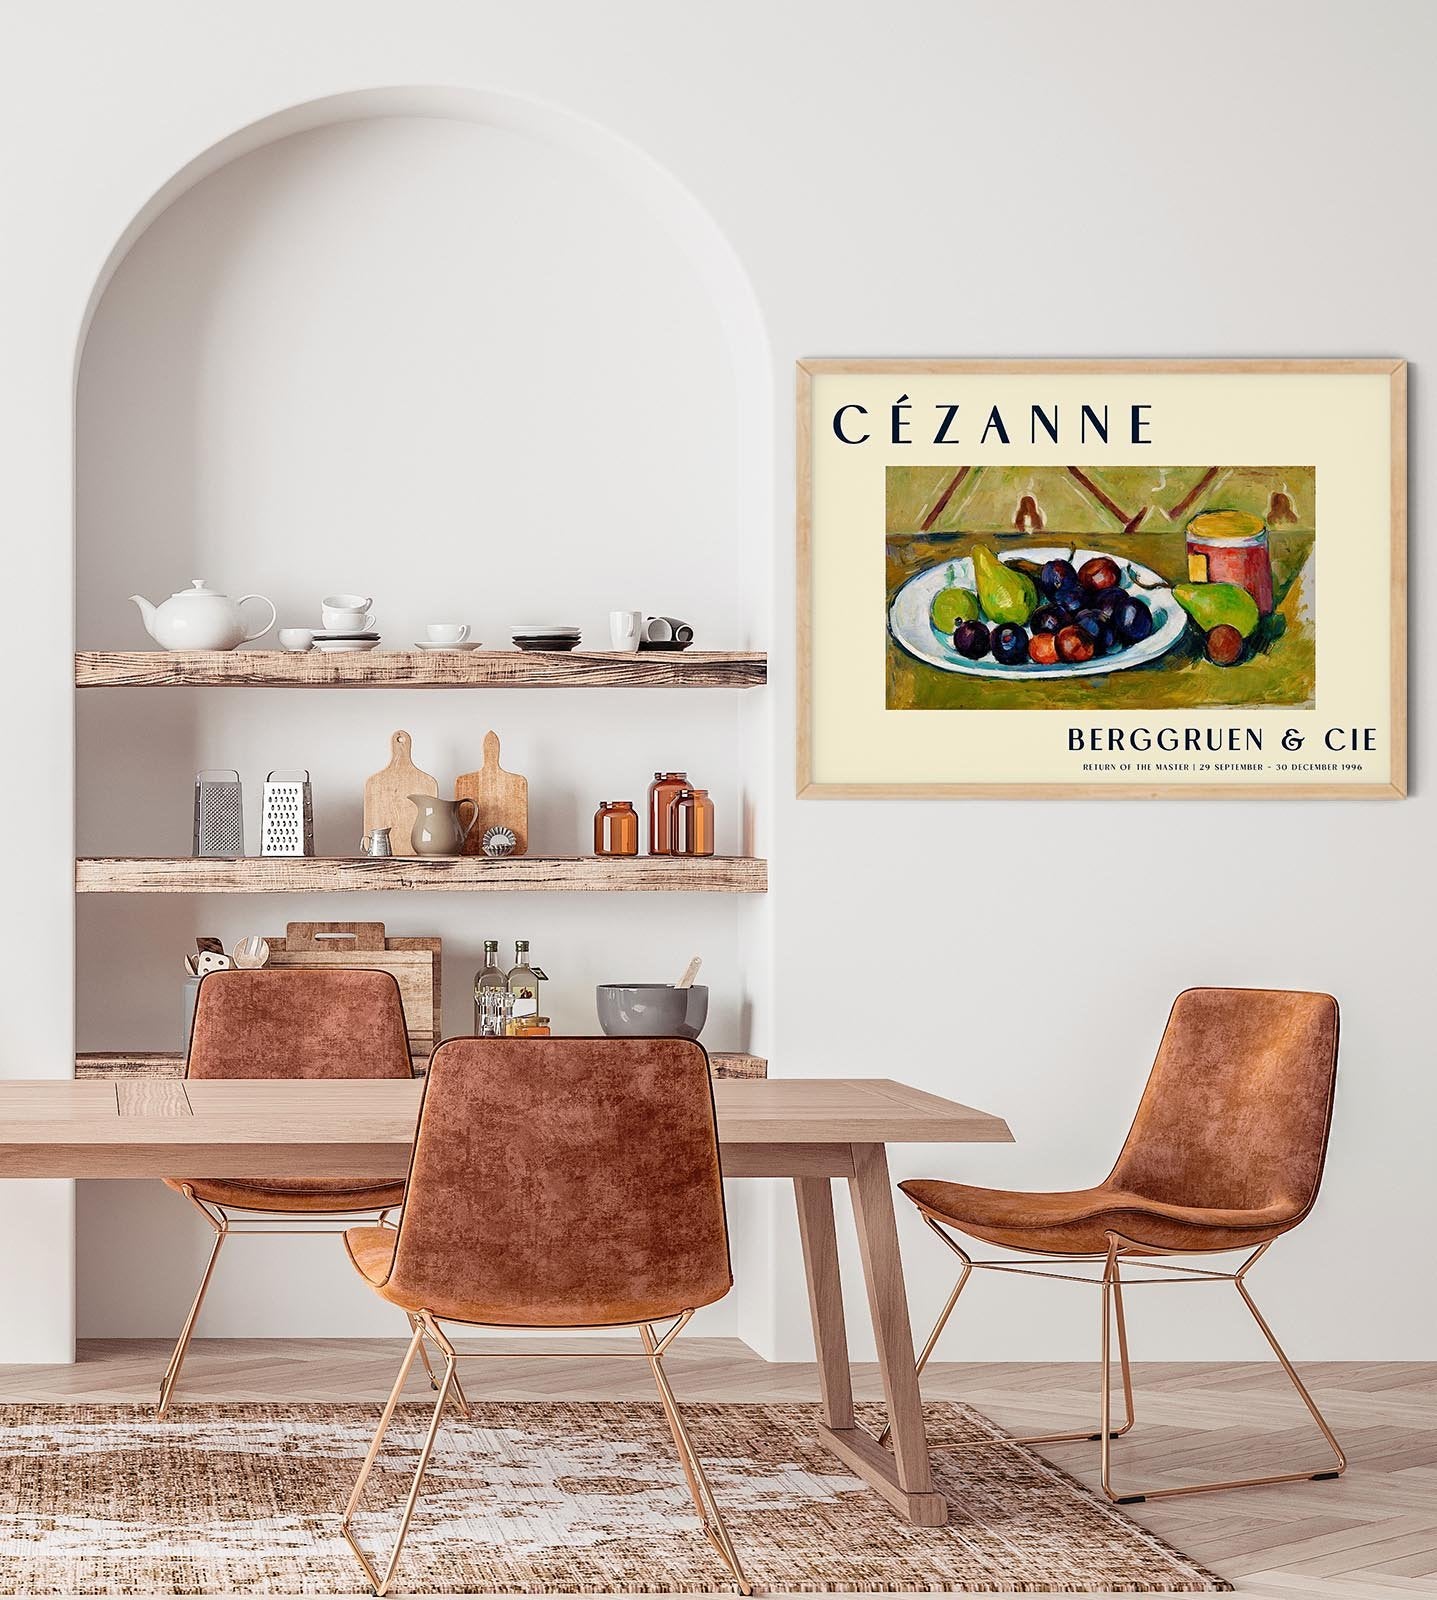 Cézanne Plate with Fruits Art Exhibition Poster